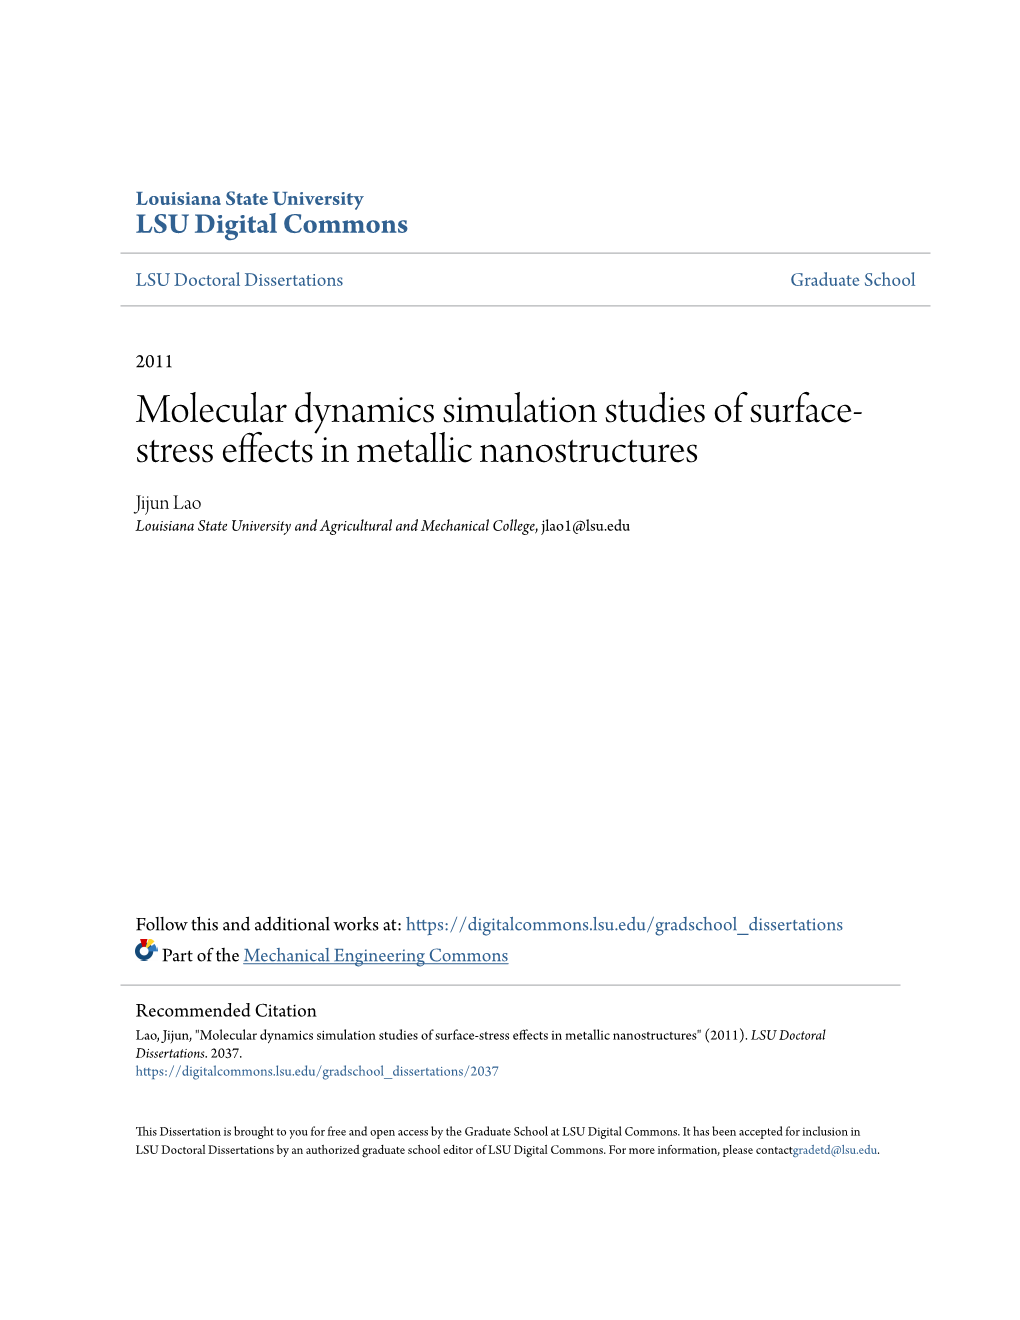 Molecular Dynamics Simulation Studies of Surface-Stress Effects in Metallic Nanostructures" (2011)